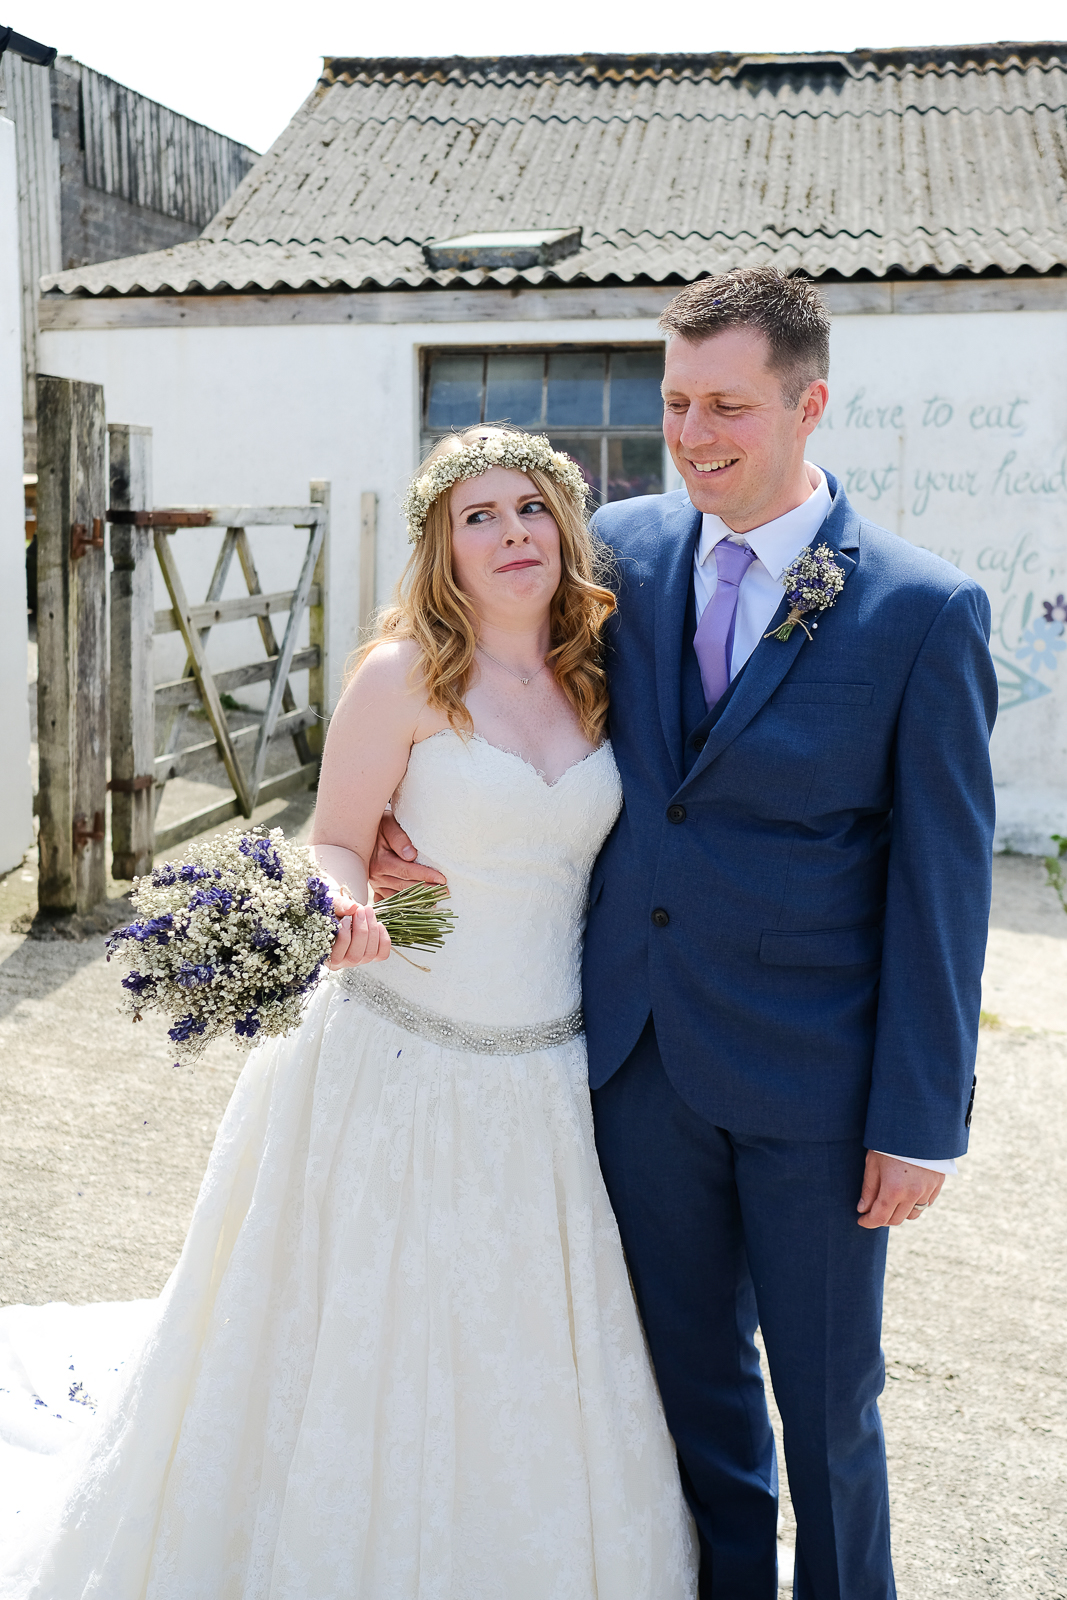 Rustic elopement at The Cow Shed in Cornwall 046.jpg